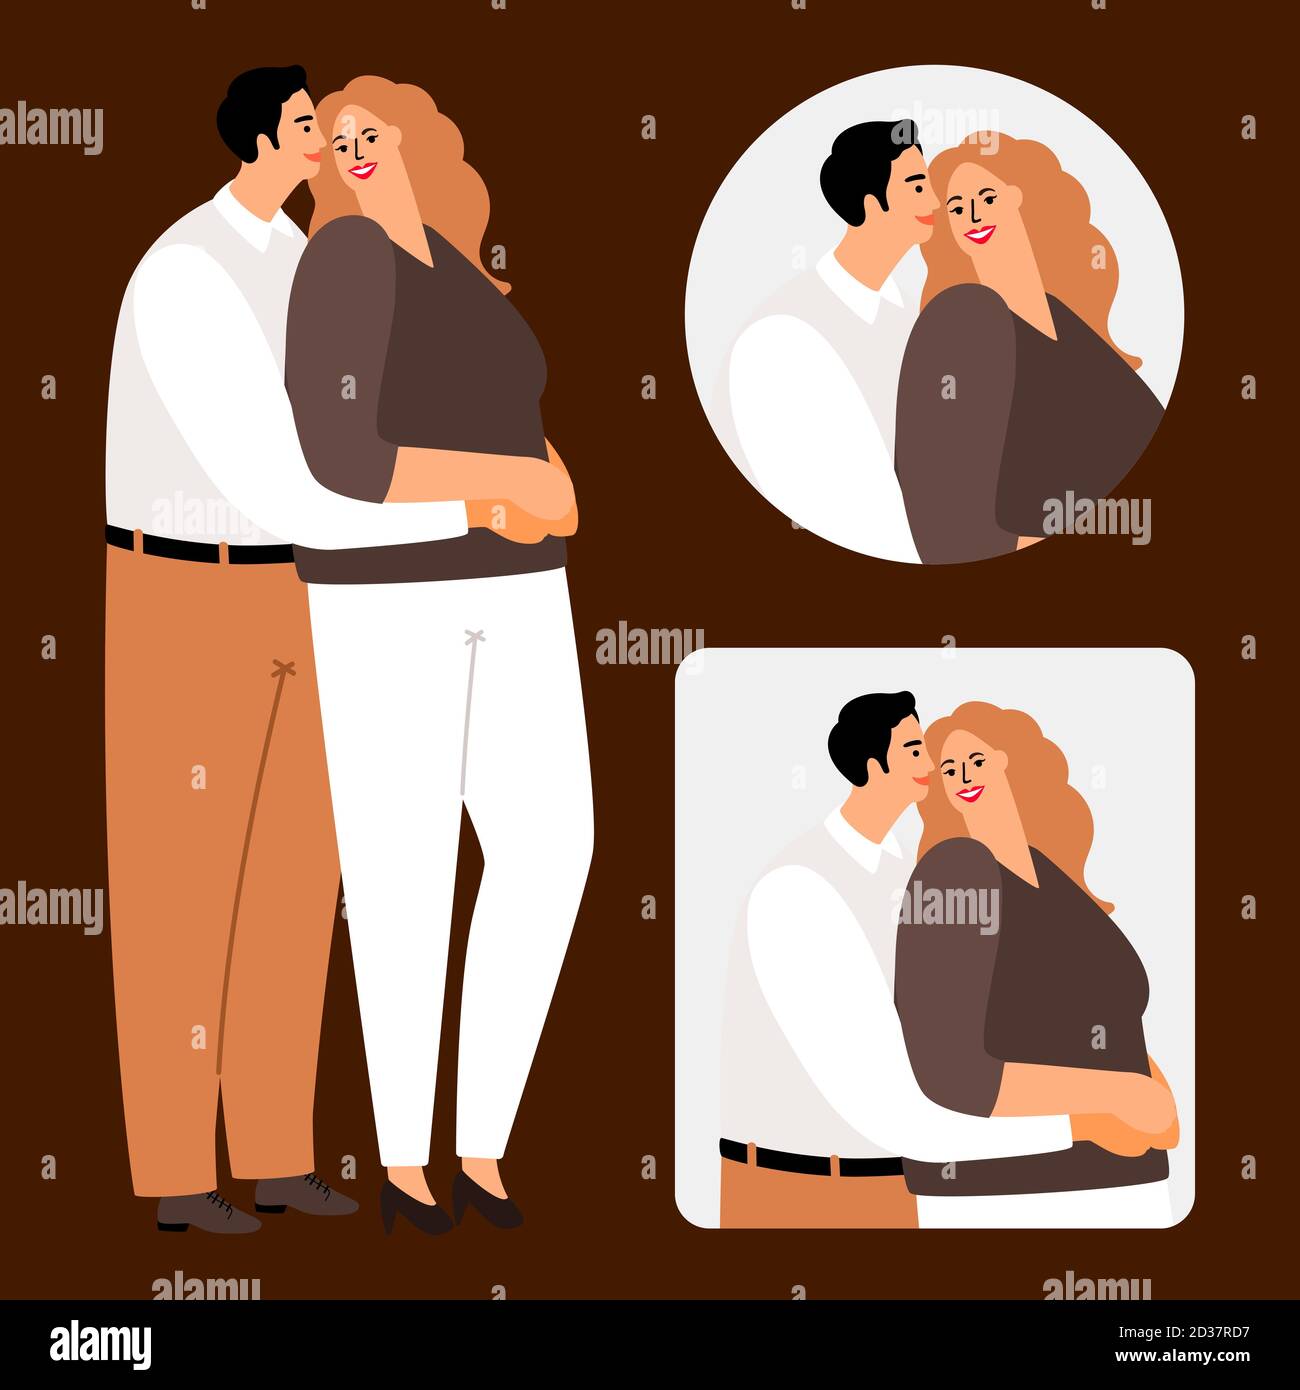 Couple in love, embrace of woman and man vector illustration. Couple avatars design Stock Vector